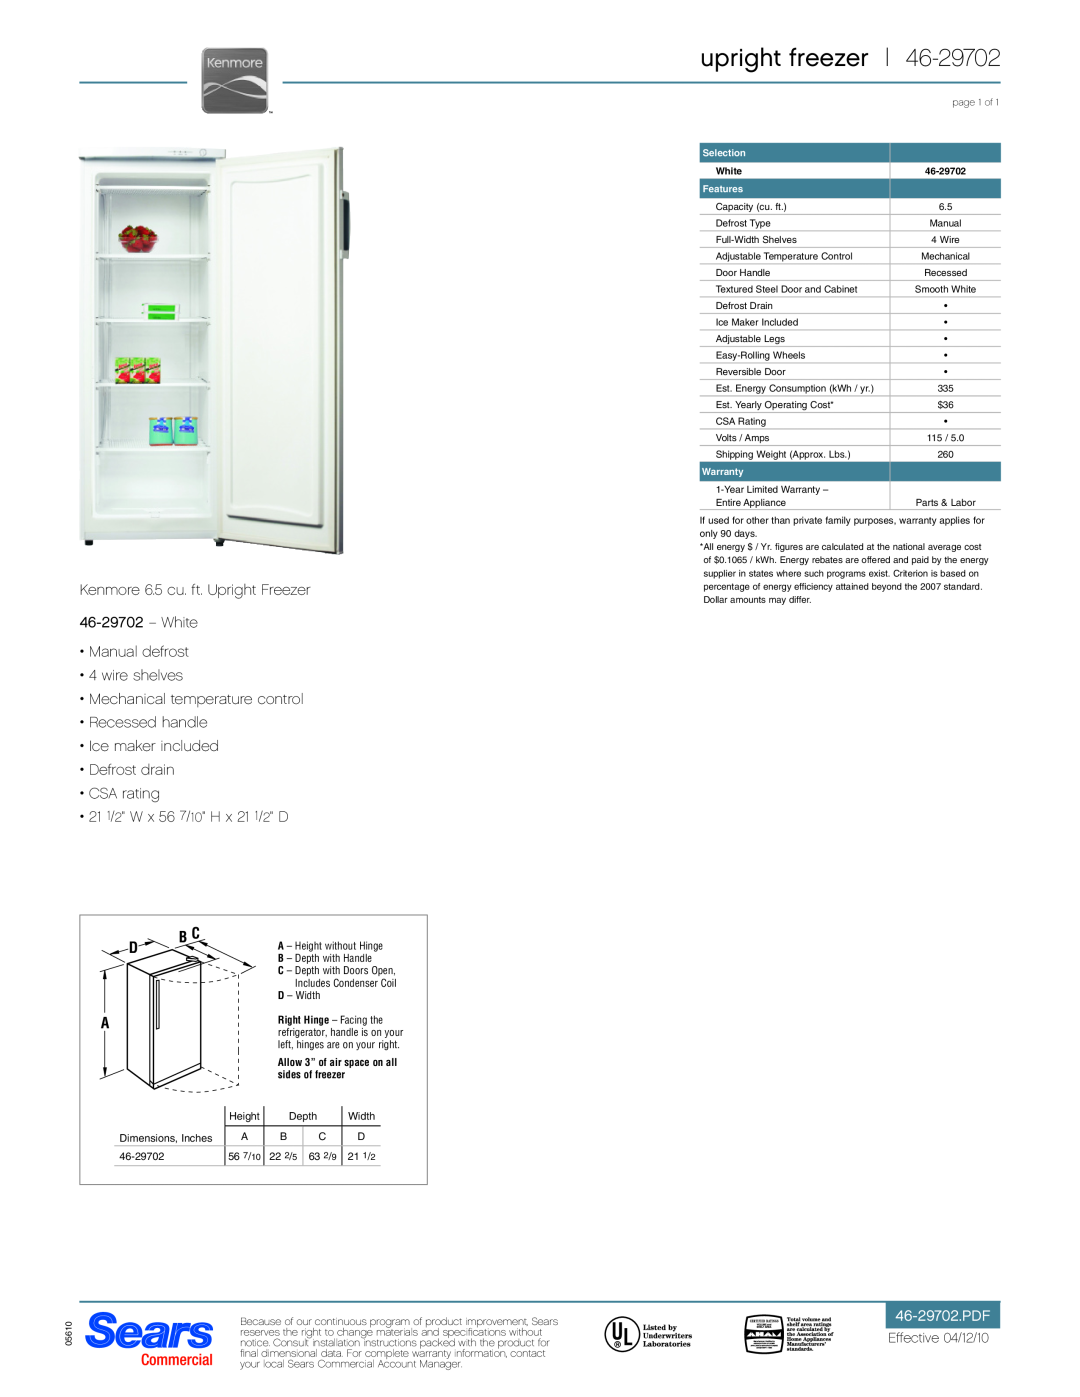 Sears 46-29702 specifications upright freezer, Kenmore 6.5 cu. ft. Upright Freezer, White Manual defrost 4 wire shelves 